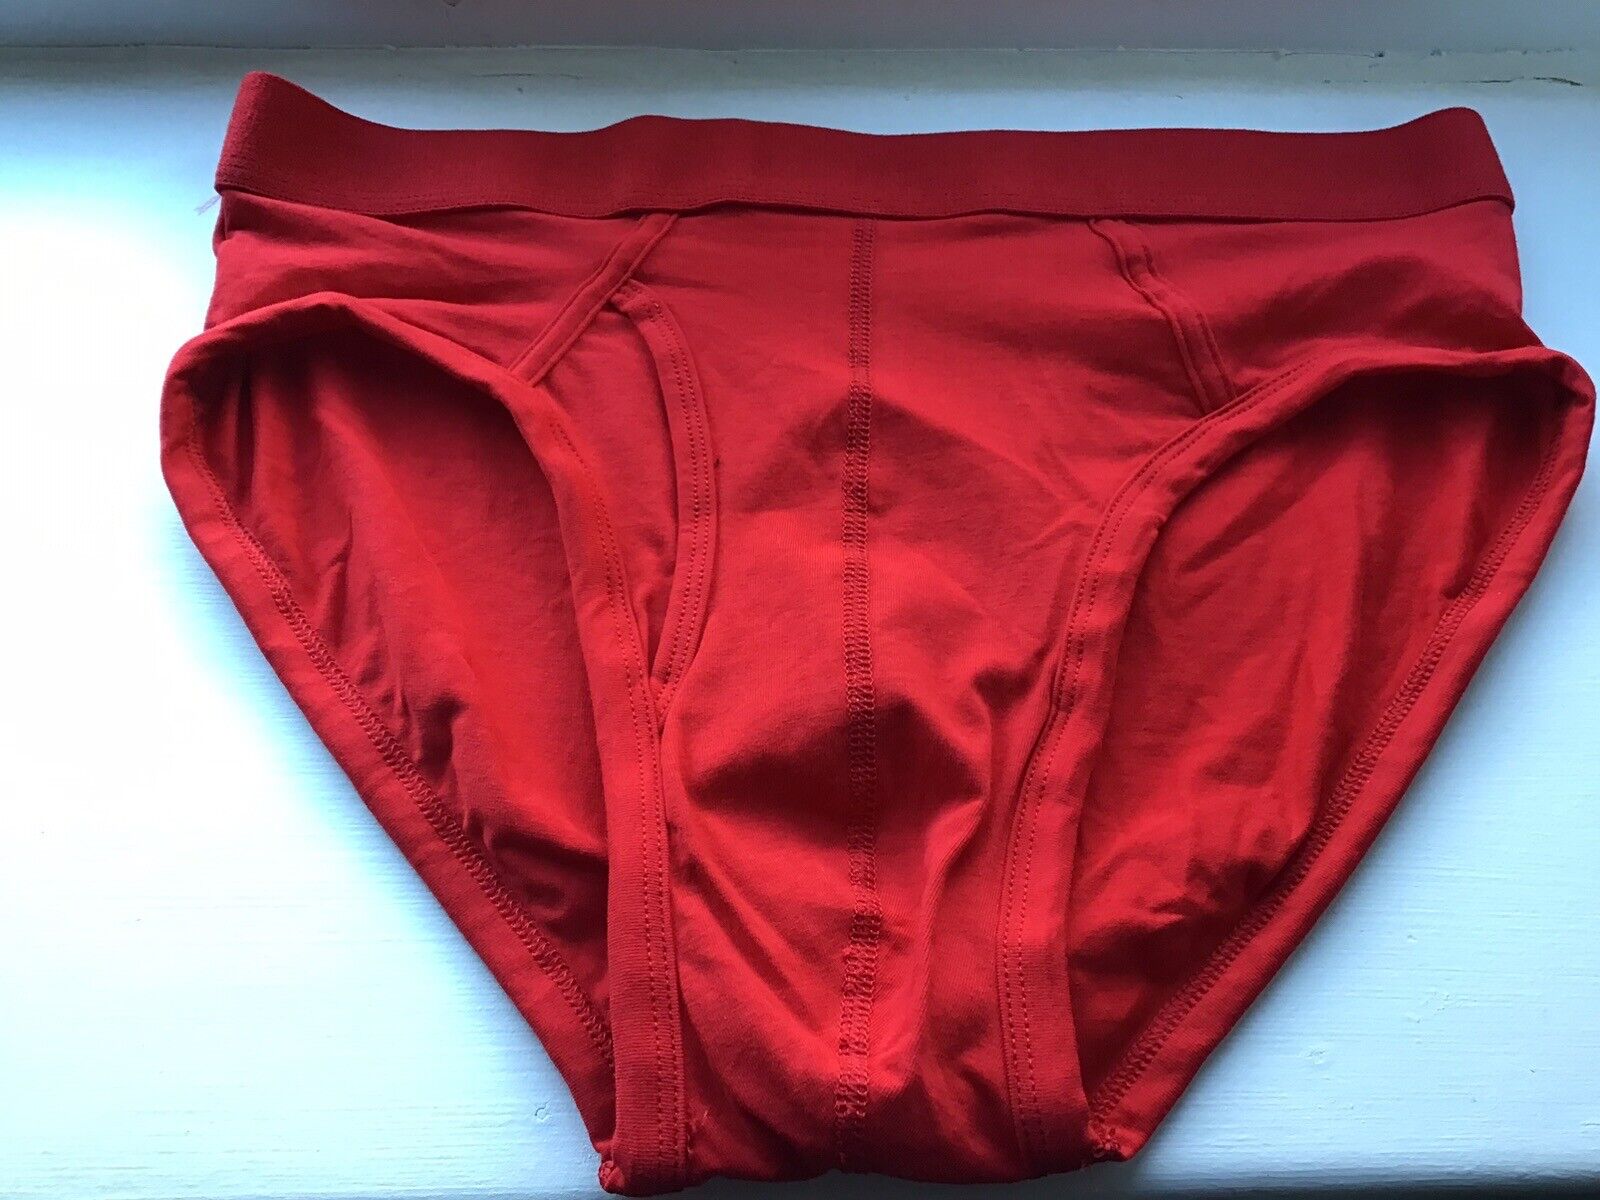 Men’s Retro Y Fronts Fly Fronts Briefs Underpants Gay Interest Large | eBay